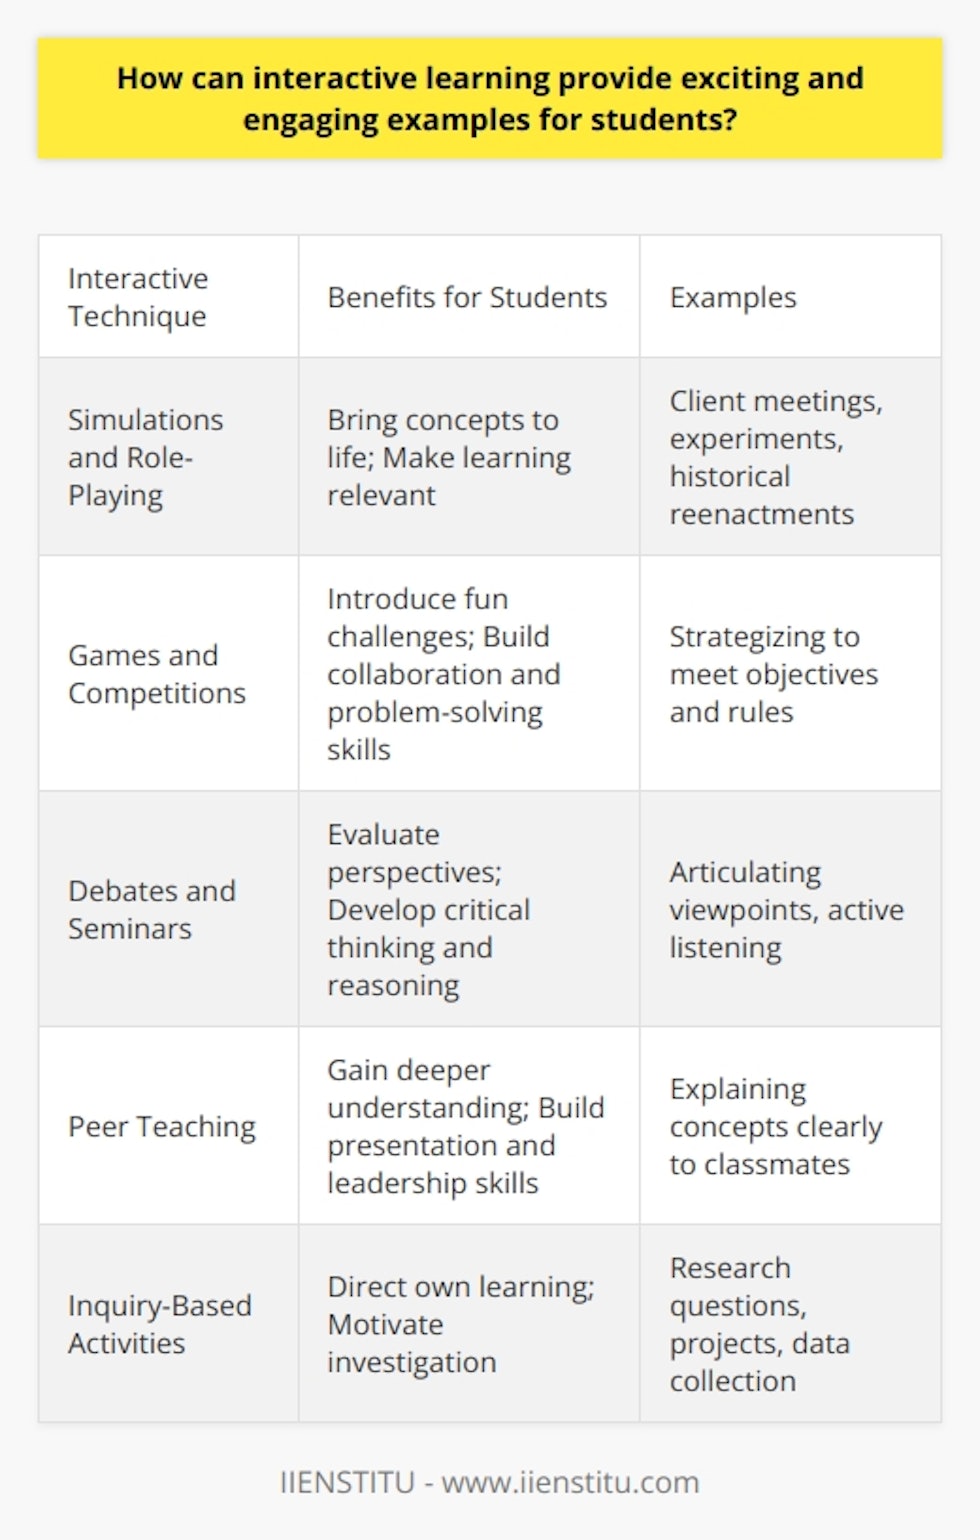 Here is a detailed content on how interactive learning provides exciting and engaging examples for students:Interactive learning techniques create dynamic and participatory classroom environments that motivate students. Varied activities cater to different learning styles, allowing students to take control of their education through inquiry, discussion, and hands-on projects. This autonomy boosts enthusiasm and engagement. Simulations and role-playing bring academic concepts to life. Business students could act out client meetings, science students could perform experiments, and history students could reenact historical events. These real-world scenarios make learning relevant and cement abstract ideas. Games and competitions introduce fun challenges with rules and objectives. Students strategize, collaborate, and problem-solve. Friendly rivalry adds excitement while teamwork builds social skills.Debates and Socratic seminars encourage evaluation of multiple perspectives. Students synthesize information, think critically, and articulate original viewpoints. The constructive exchange of ideas promotes active listening and reasoning abilities.Peer teaching allows students to present concepts to classmates. In preparing to explain material clearly, students gain a deeper understanding. Sharing expertise also builds public speaking and leadership skills.Inquiry-based activities let students direct their own learning through investigation. Generating research questions, designing projects, collecting data, and drawing conclusions motivate self-discovery and ownership of knowledge. Reflection exercises like journals, blogs, and group discussions help students process lessons, cement takeaways, and make real-world connections. Articulating new ideas in one's own words improves retention.This diversity of interactive techniques caters to different learning styles and provides exciting scenarios that stimulate critical thinking, collaboration, and practical applications of course material. The result is an engaging student experience focused on comprehension and skills development.